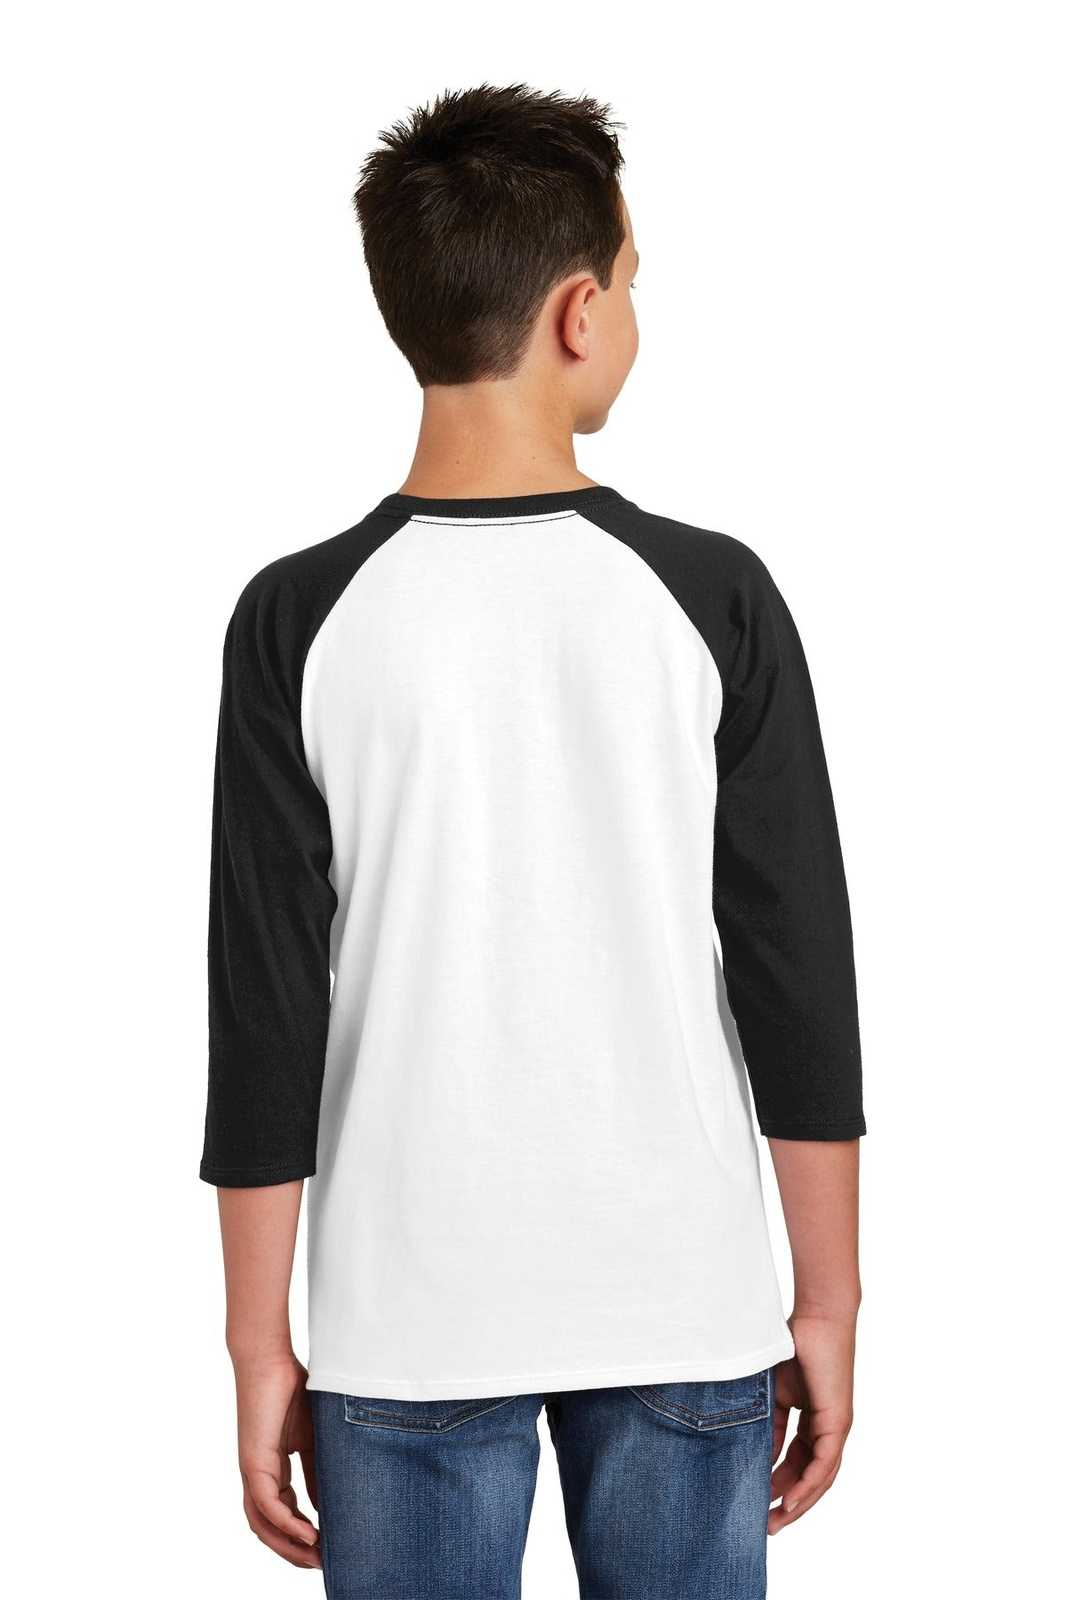 District DT6210Y Youth Very Important Tee 3/4-Sleeve - Black White - HIT a Double - 2